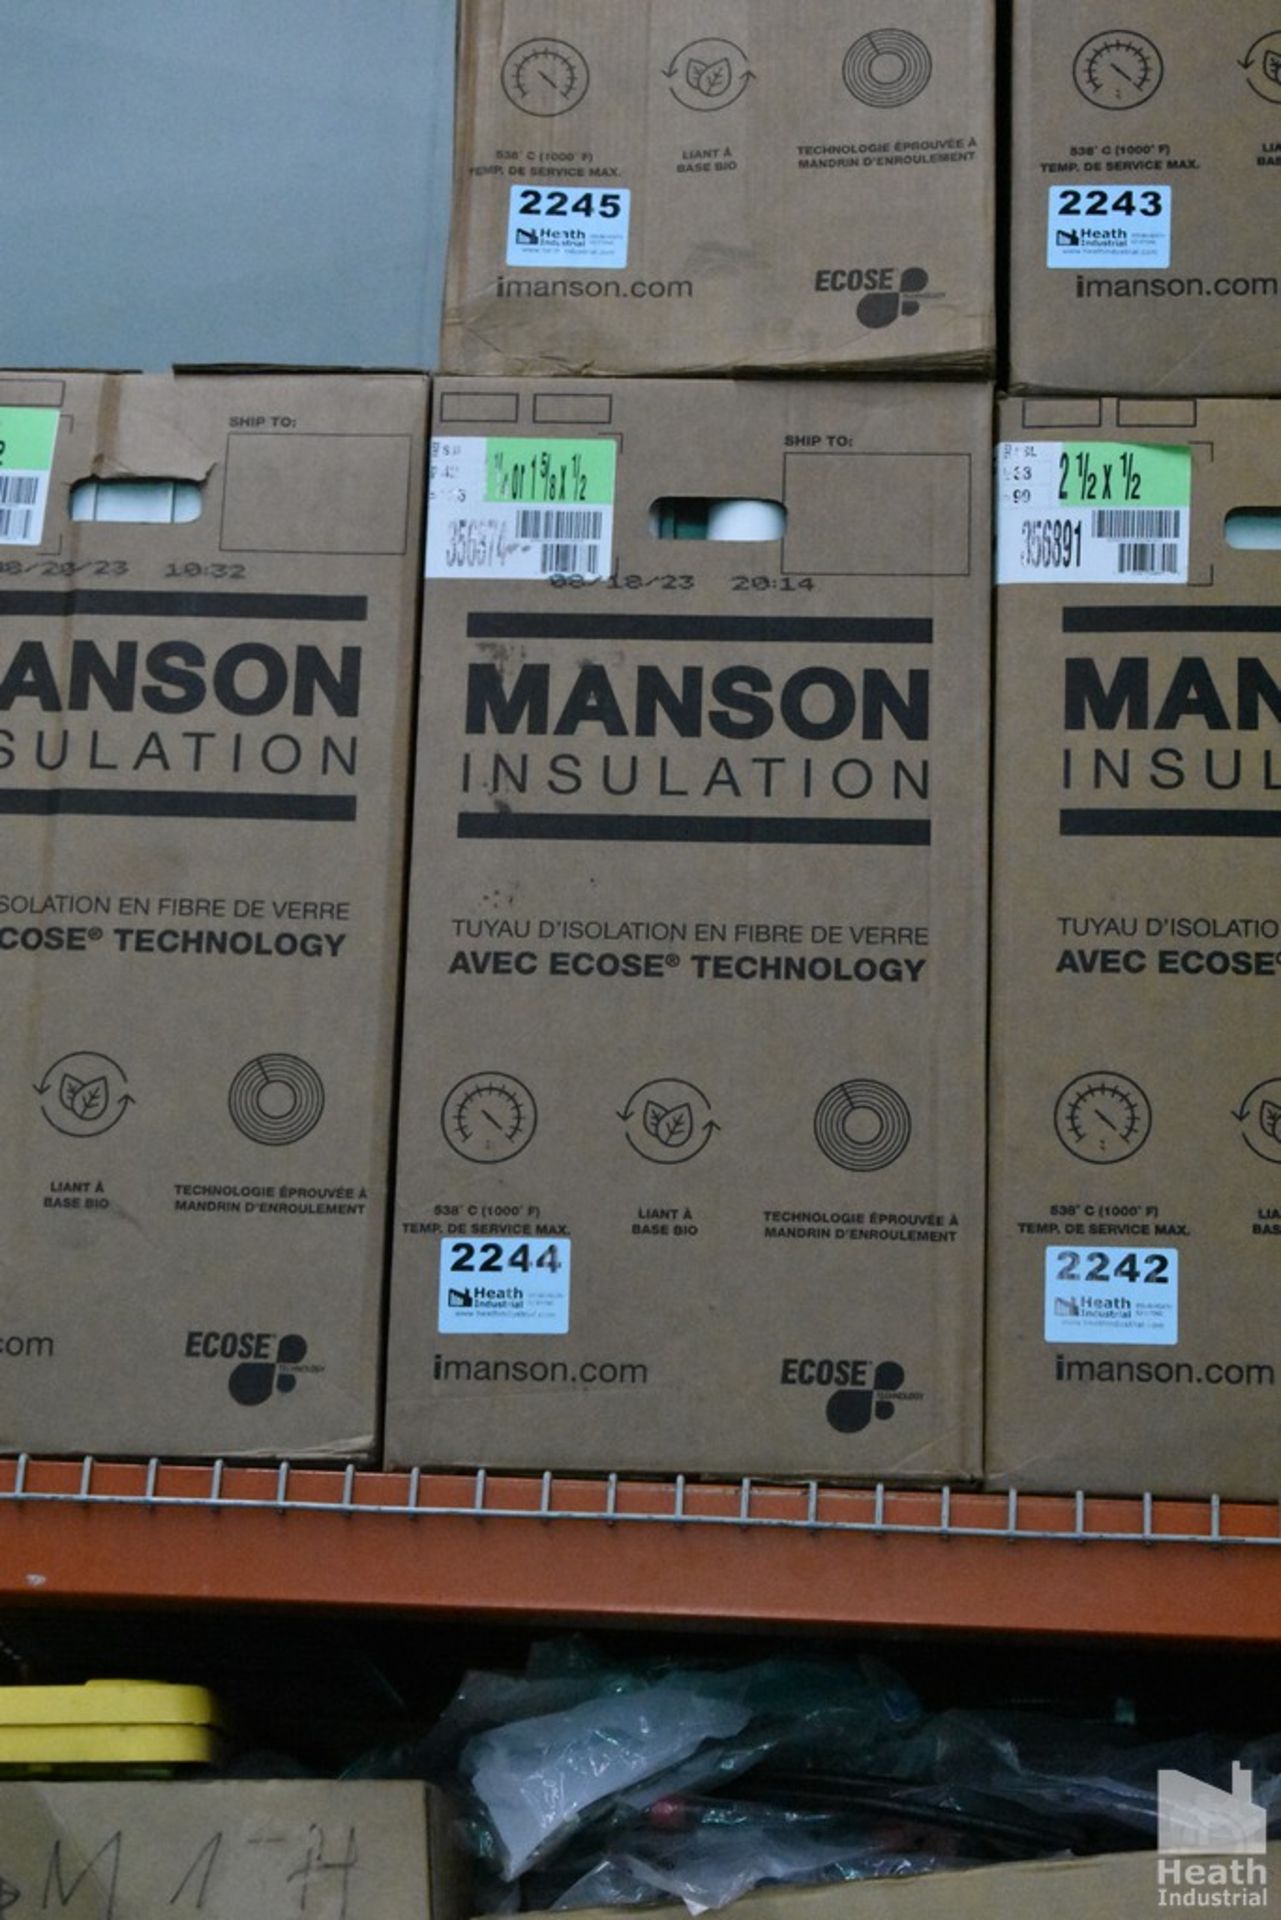 CASE OF MANSON INSULATION, 1-1/4 OR 1-8/5 X 1/2, NEW IN BOX, NO. 356874